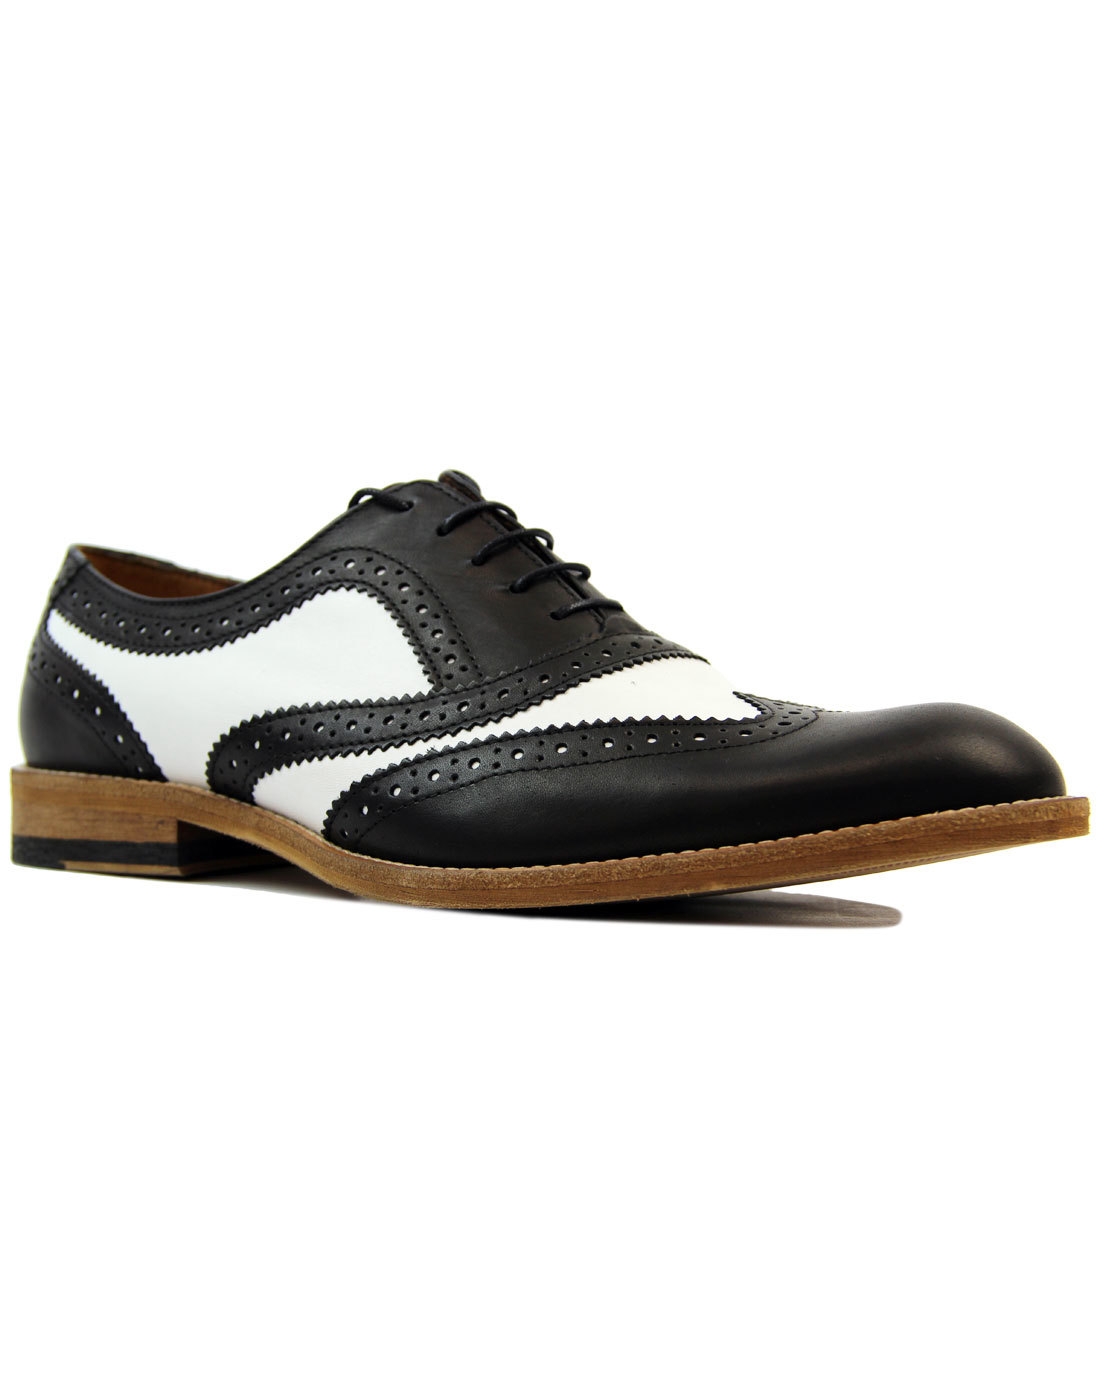 LACUZZO 1960s Mod Two Tone Oxford Brogue Shoes